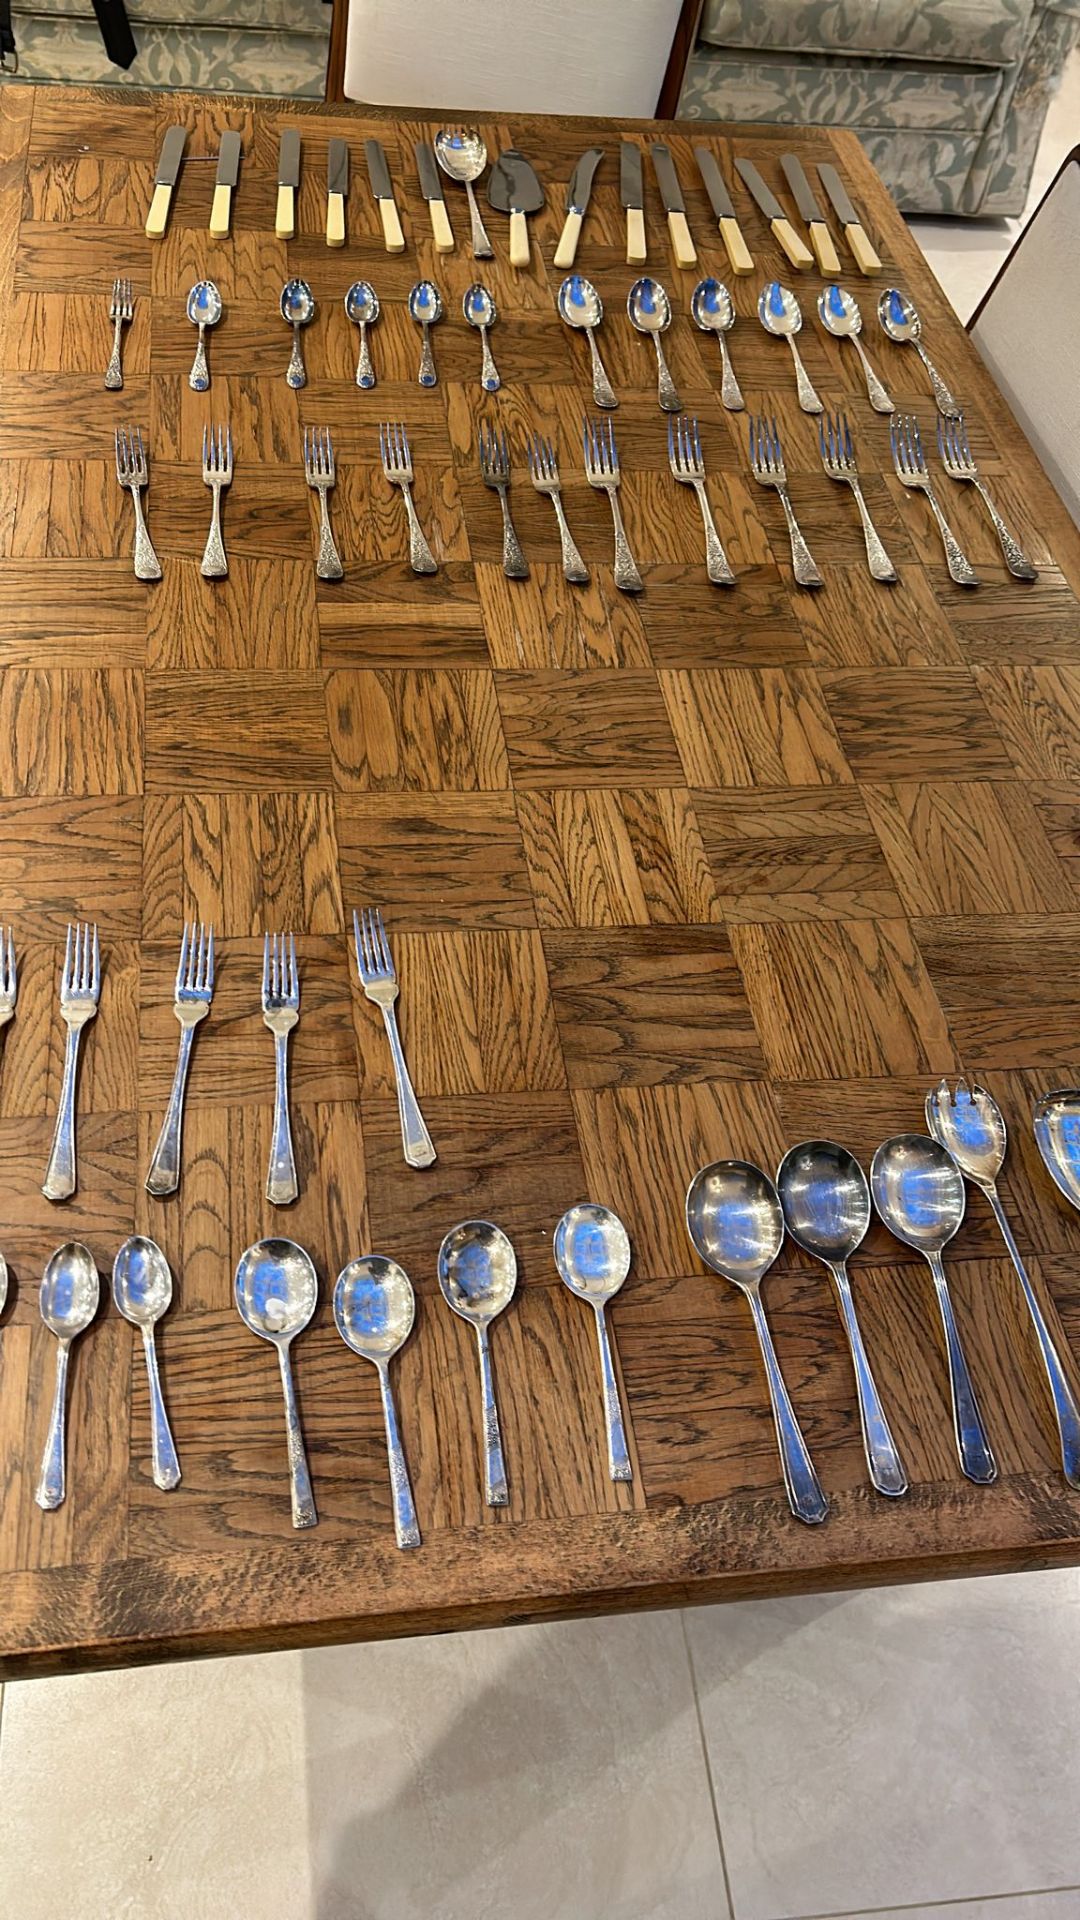 A set of 12 x Vintage Henry Hobson & Sons Express Table Knives - Firth Stainless Flatware, 1930s. - Image 2 of 5